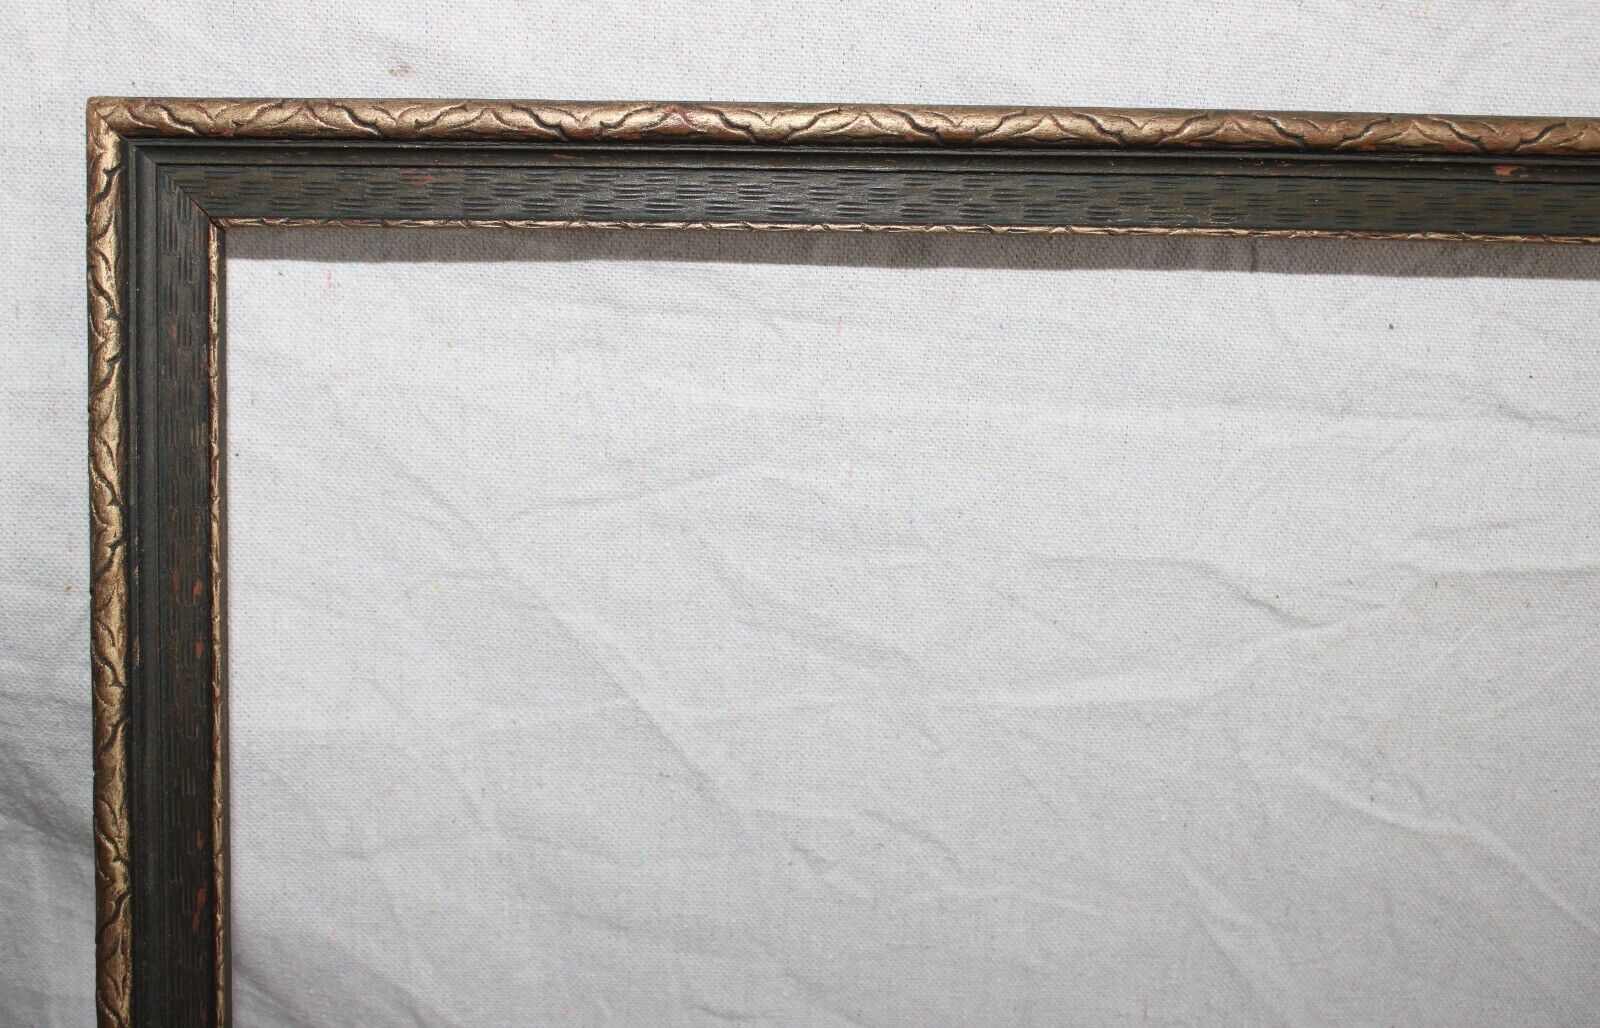 ANTIQUE FIT 12 X 16 PICTURE DOCUMENT MAP FRAME WOOD ARTS CRAFTS GOLD GILT ORNATE